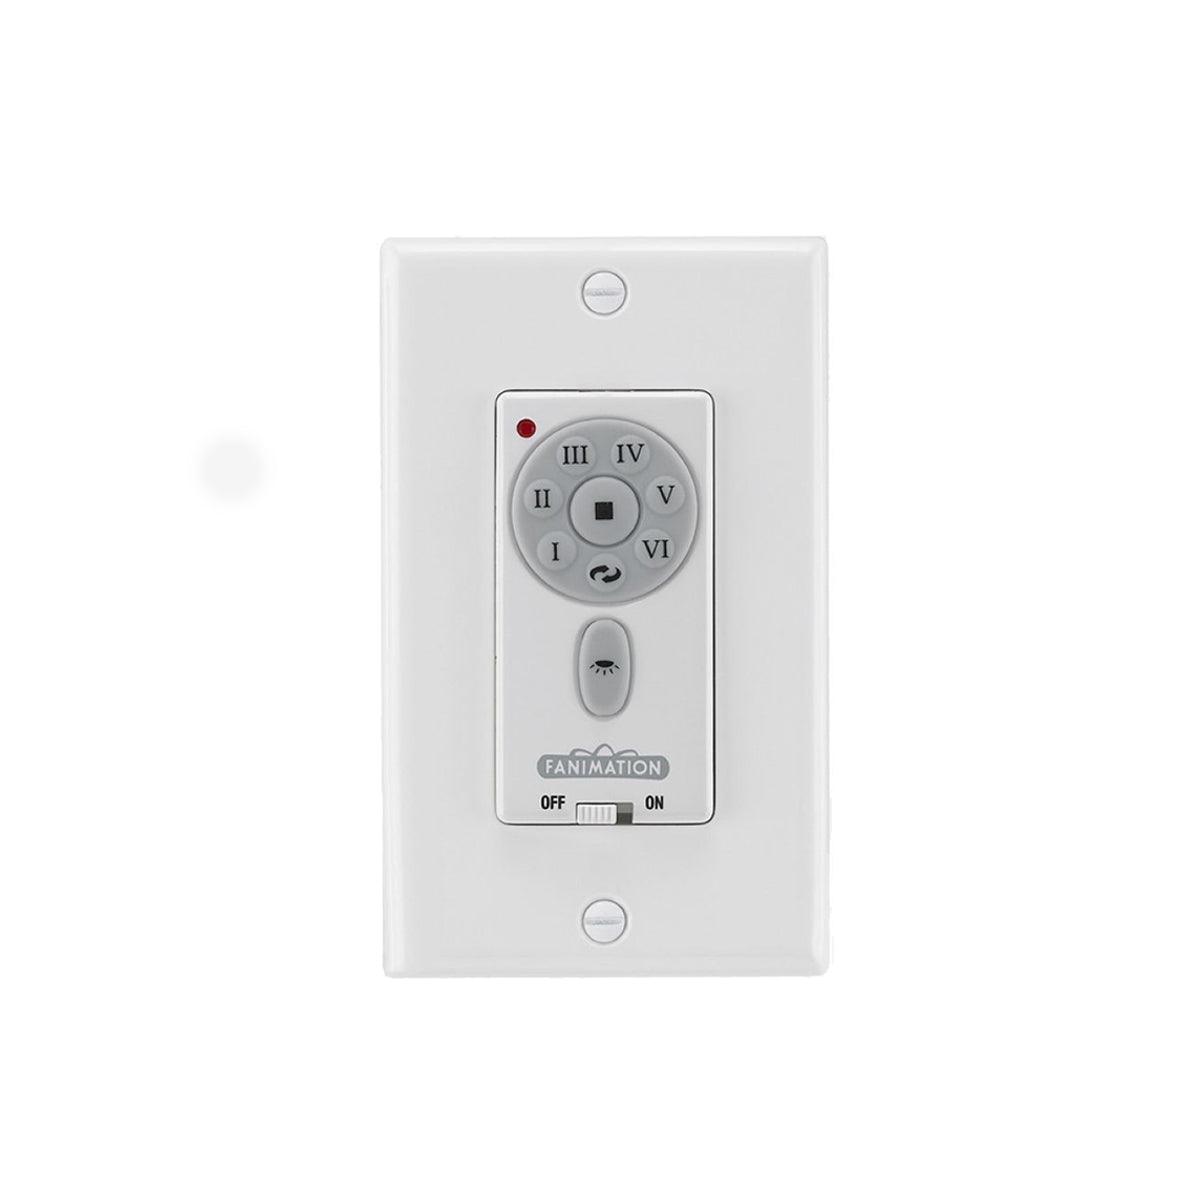 6-Speed DC Ceiling Fan And Light Wall Control, Reversing Switch, White Finish